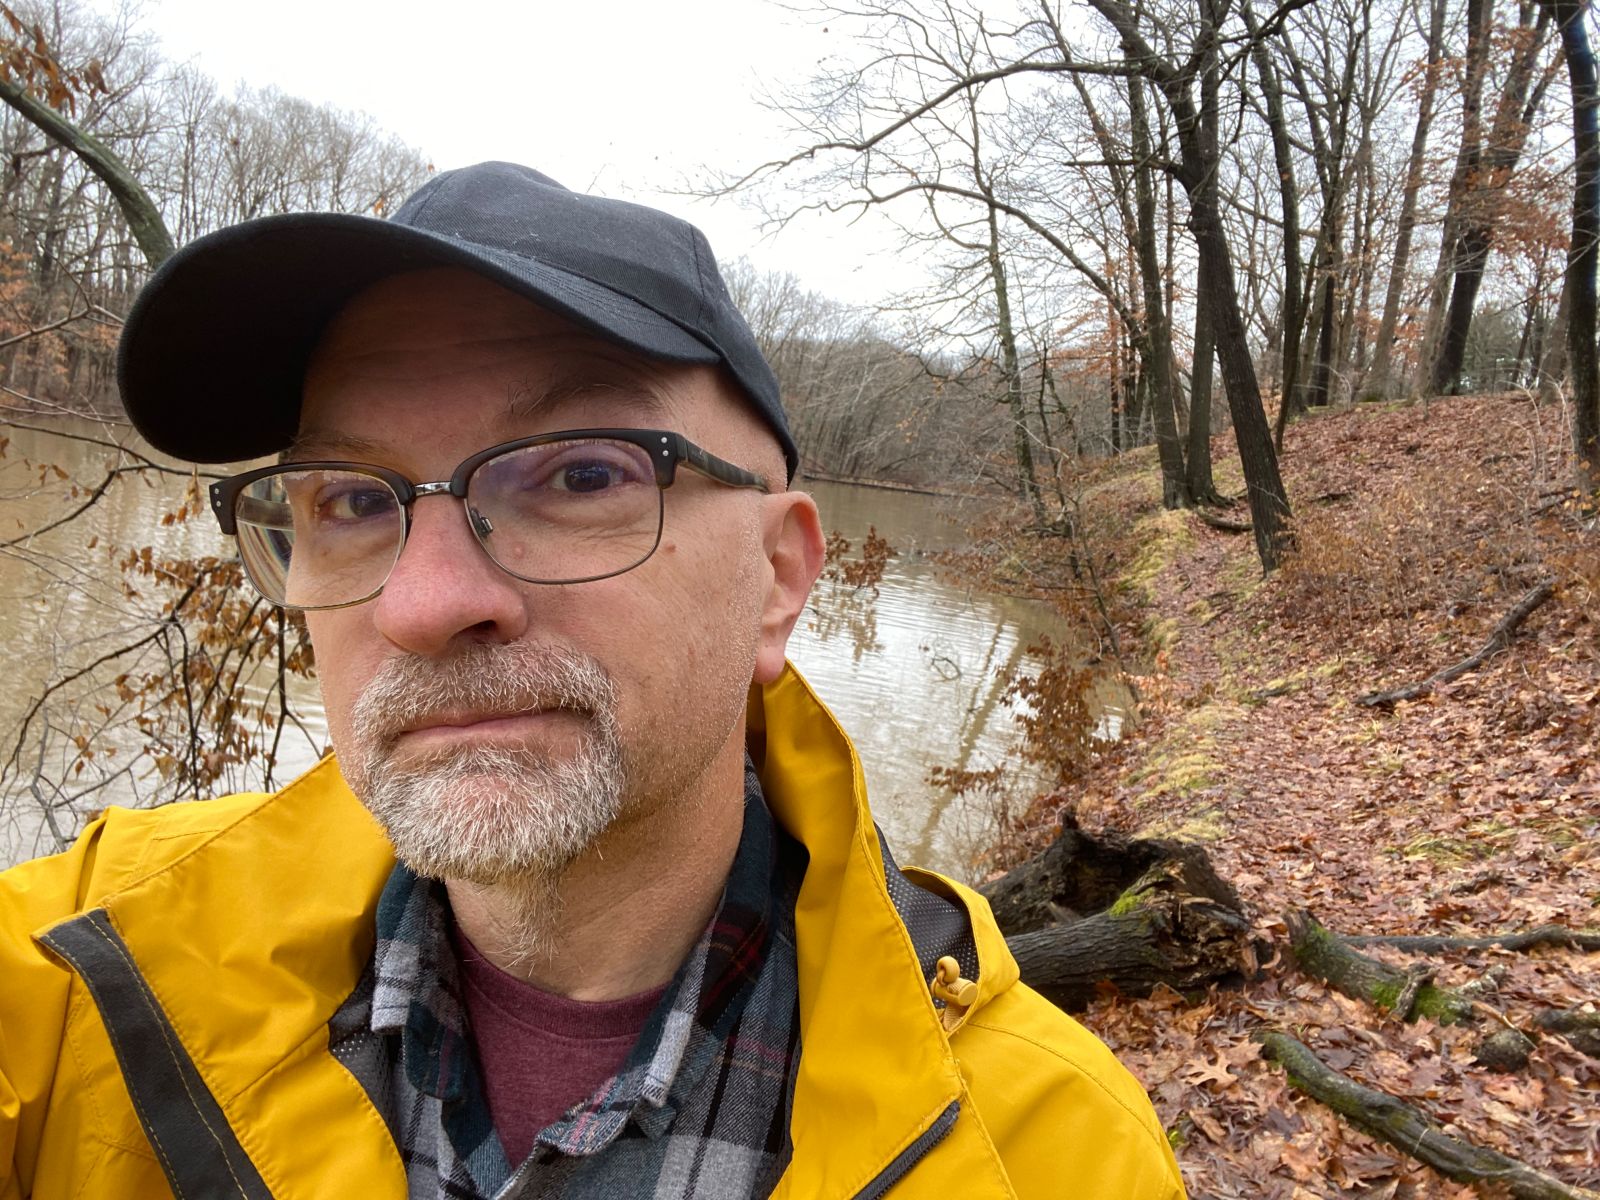 Yours truly on my current-favorite trail, which hugs Lake Shakamak so tightly I got my feet wet on multiple occasions.